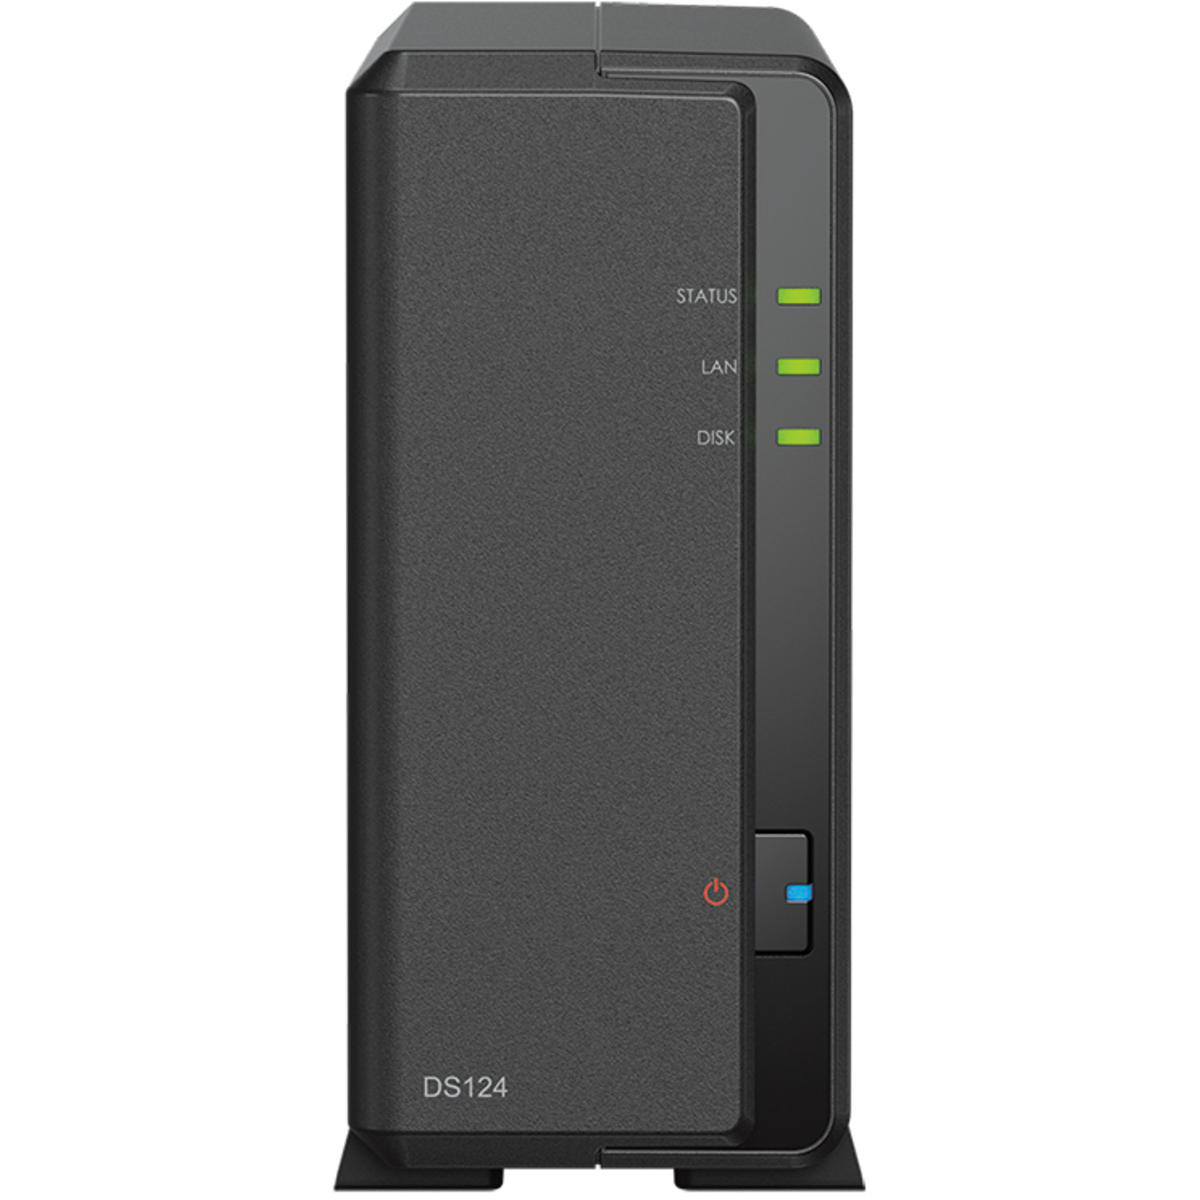 buy $739 Synology DiskStation DS124 20tb Desktop NAS - Network Attached Storage Device 1x20000gb Western Digital Red Pro WD201KFGX 3.5 7200rpm SATA 6Gb/s HDD NAS Class Drives Installed - Burn-In Tested - nas headquarters buy network attached storage server device das new raid-5 free shipping simply usa DiskStation DS124